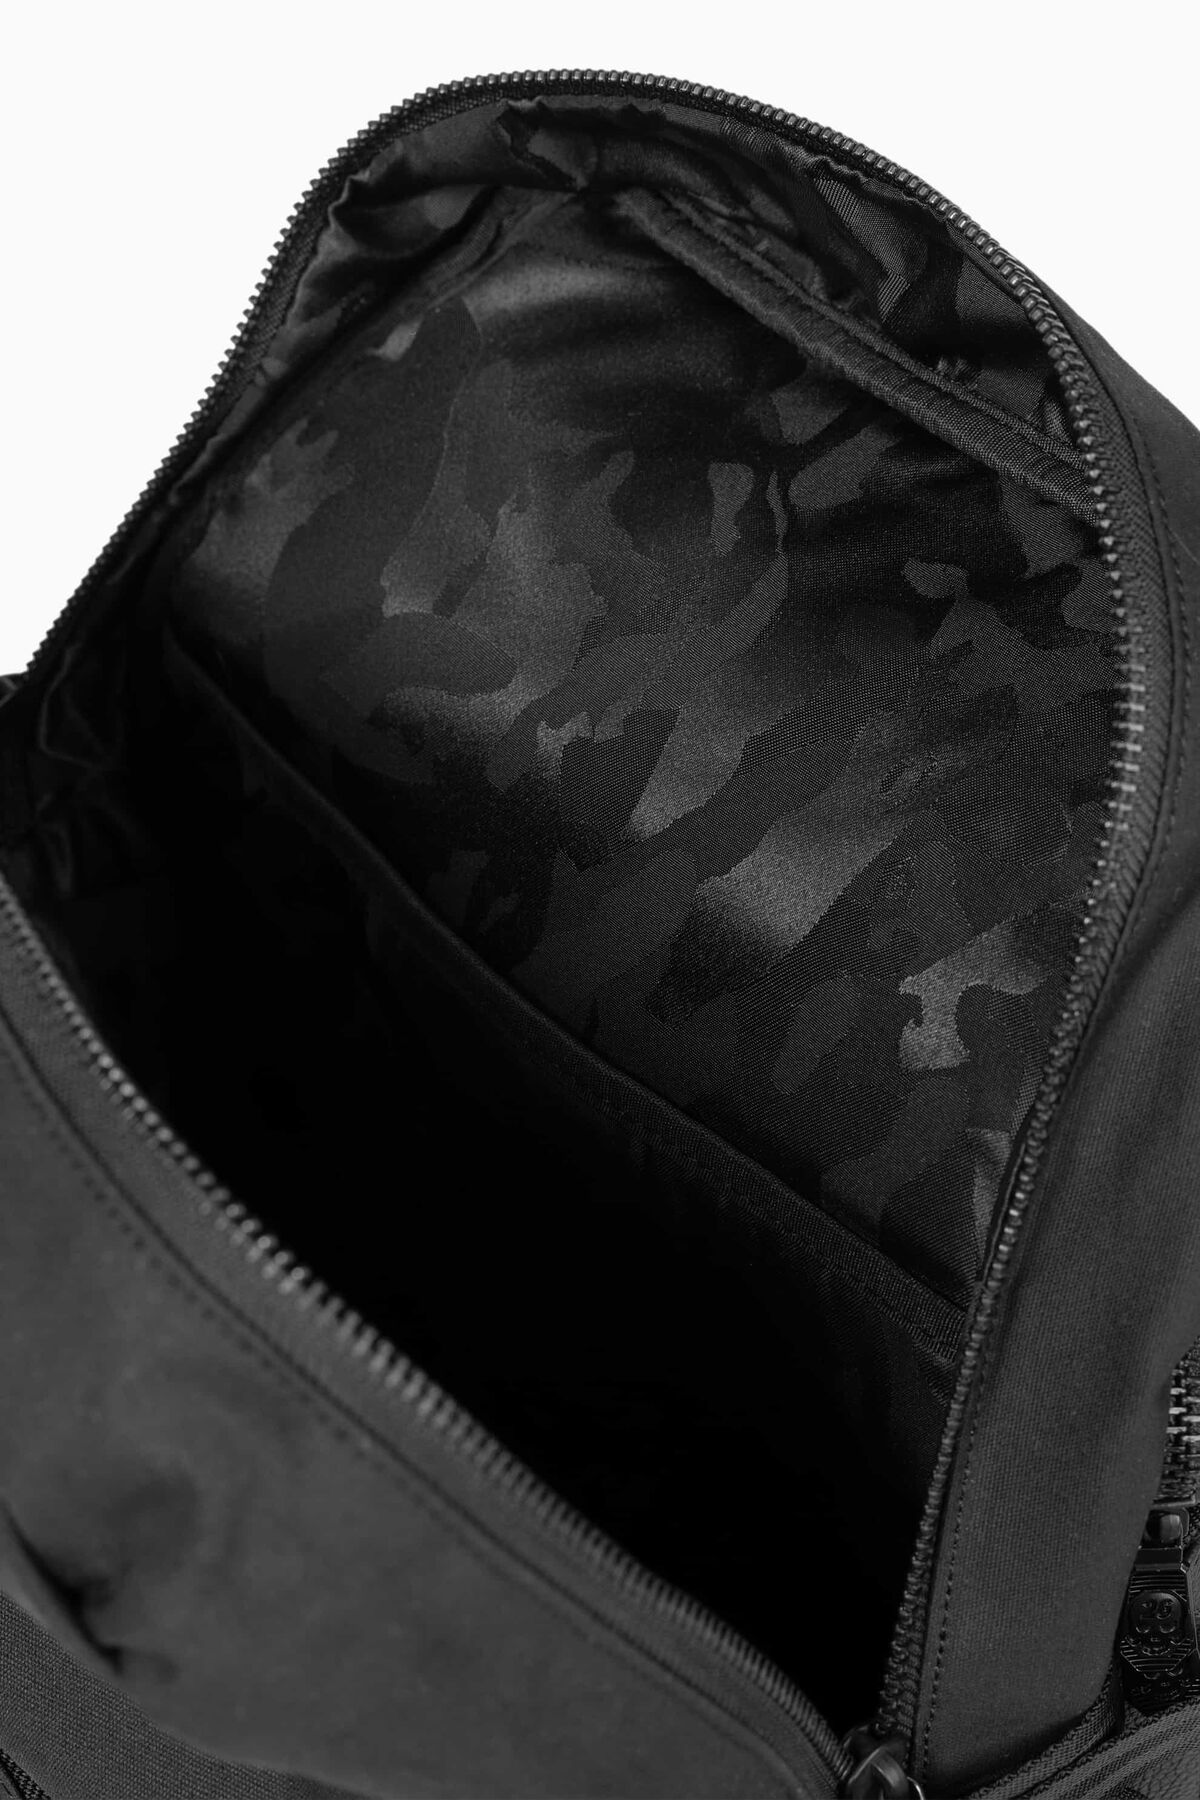 Sac à dos Darkness Troops PXG 